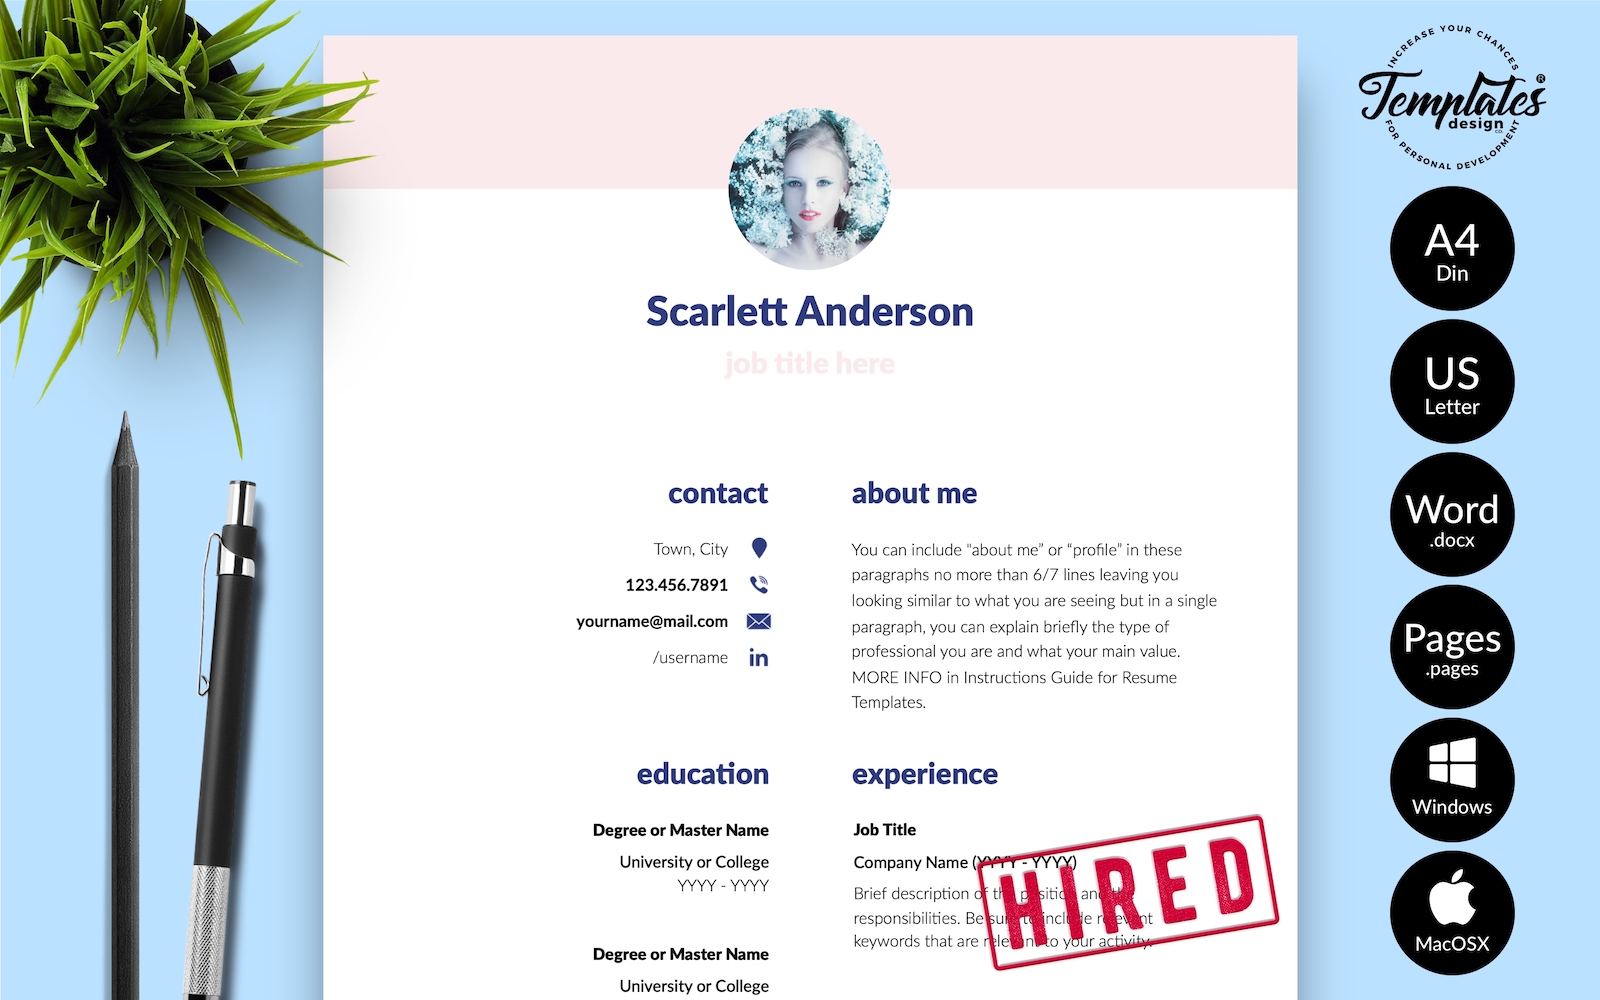 Scarlett Anderson - Creative Resume Template with Cover Letter for Microsoft Word & iWork Pages